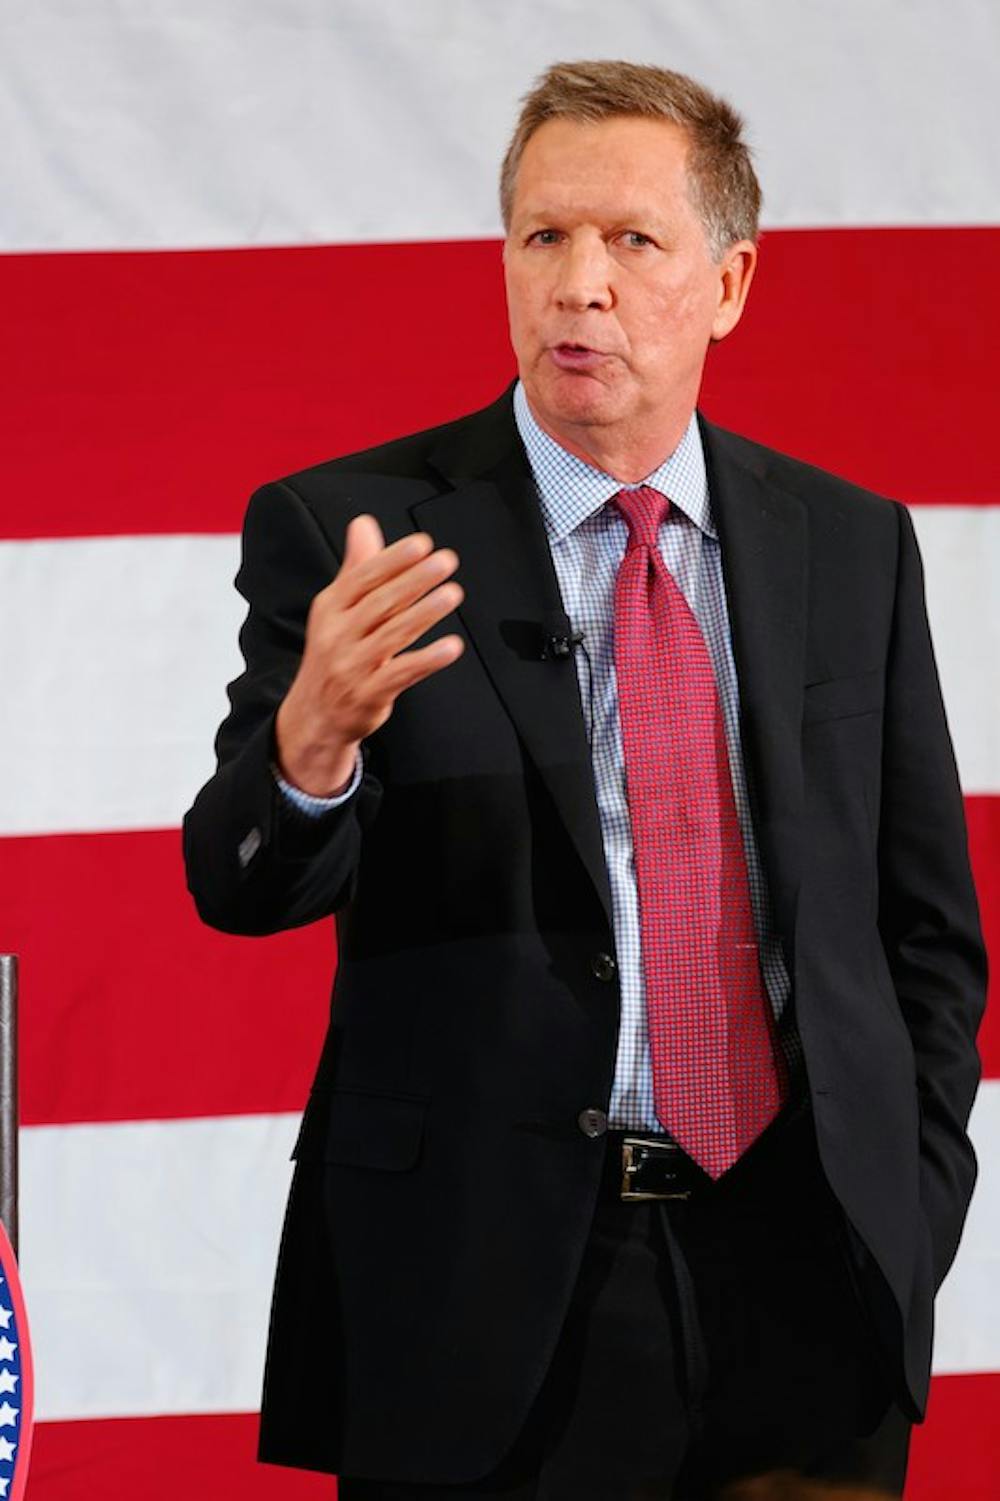 <p>John Kasich speaking in Nashua, N.H. | Courtesy of Michael Vadon/Creative Commons</p>